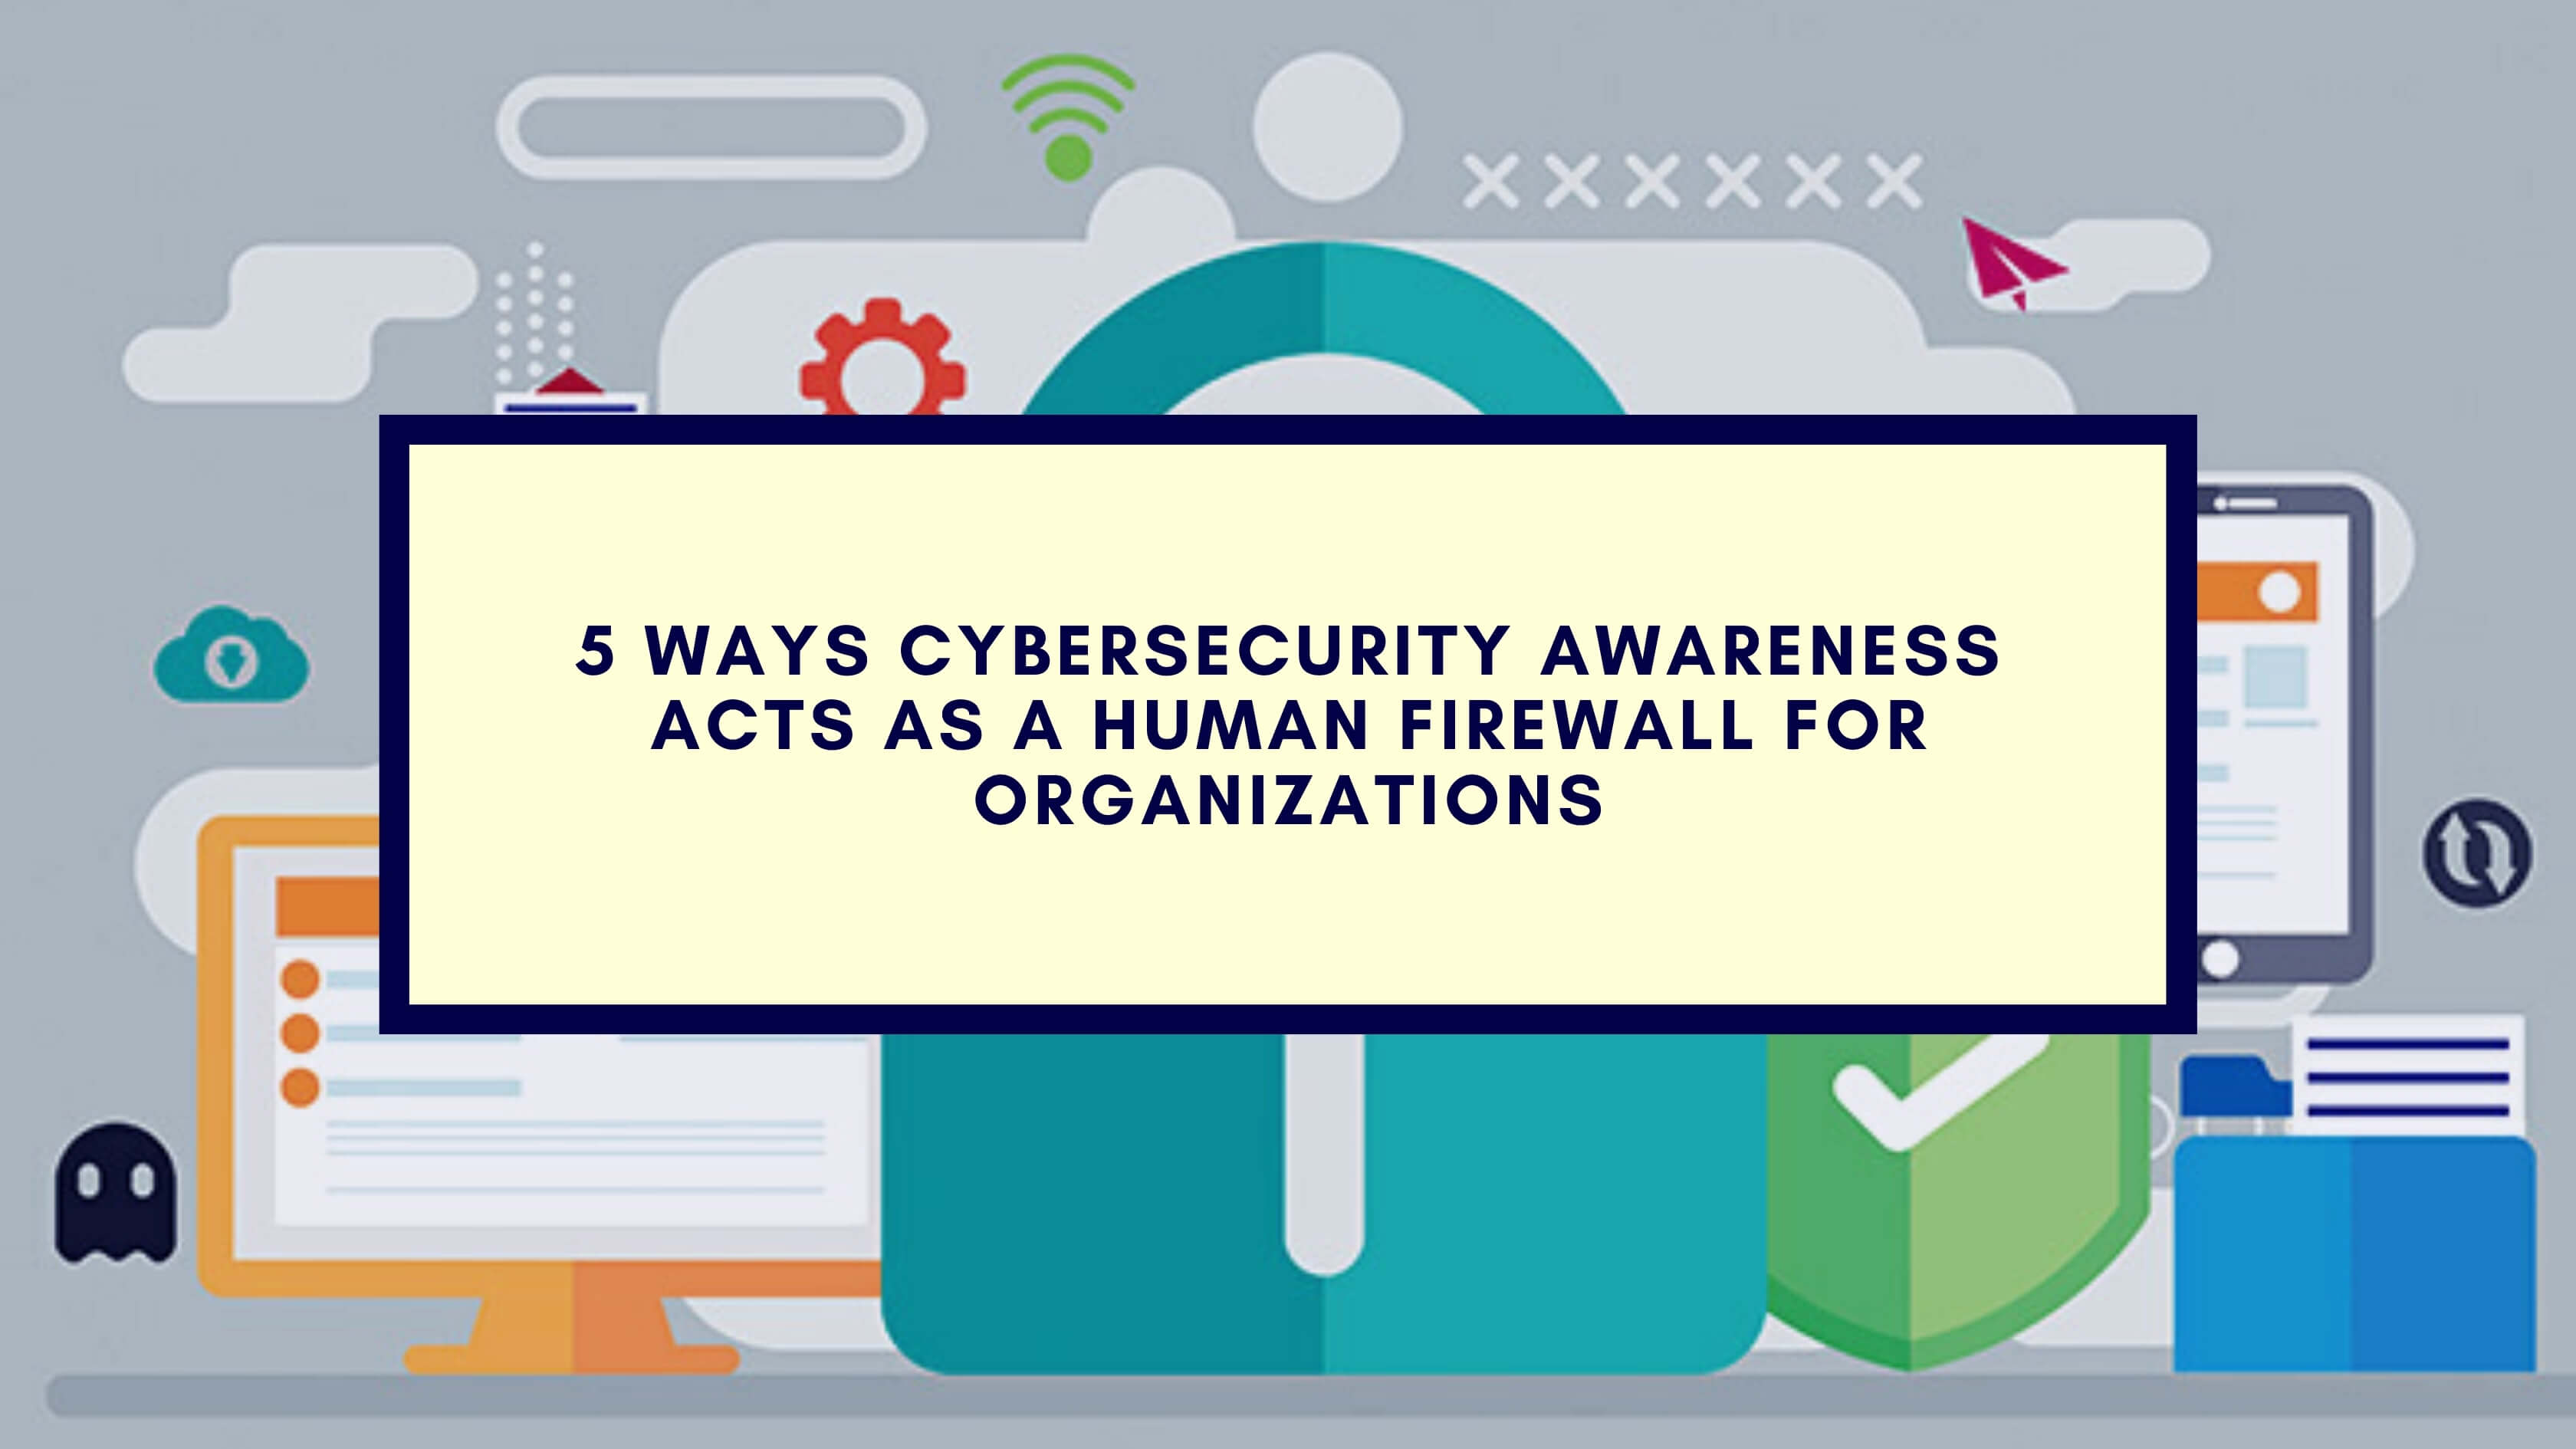 5 Ways Cybersecurity Awareness Acts as a Human Firewall for Organizations